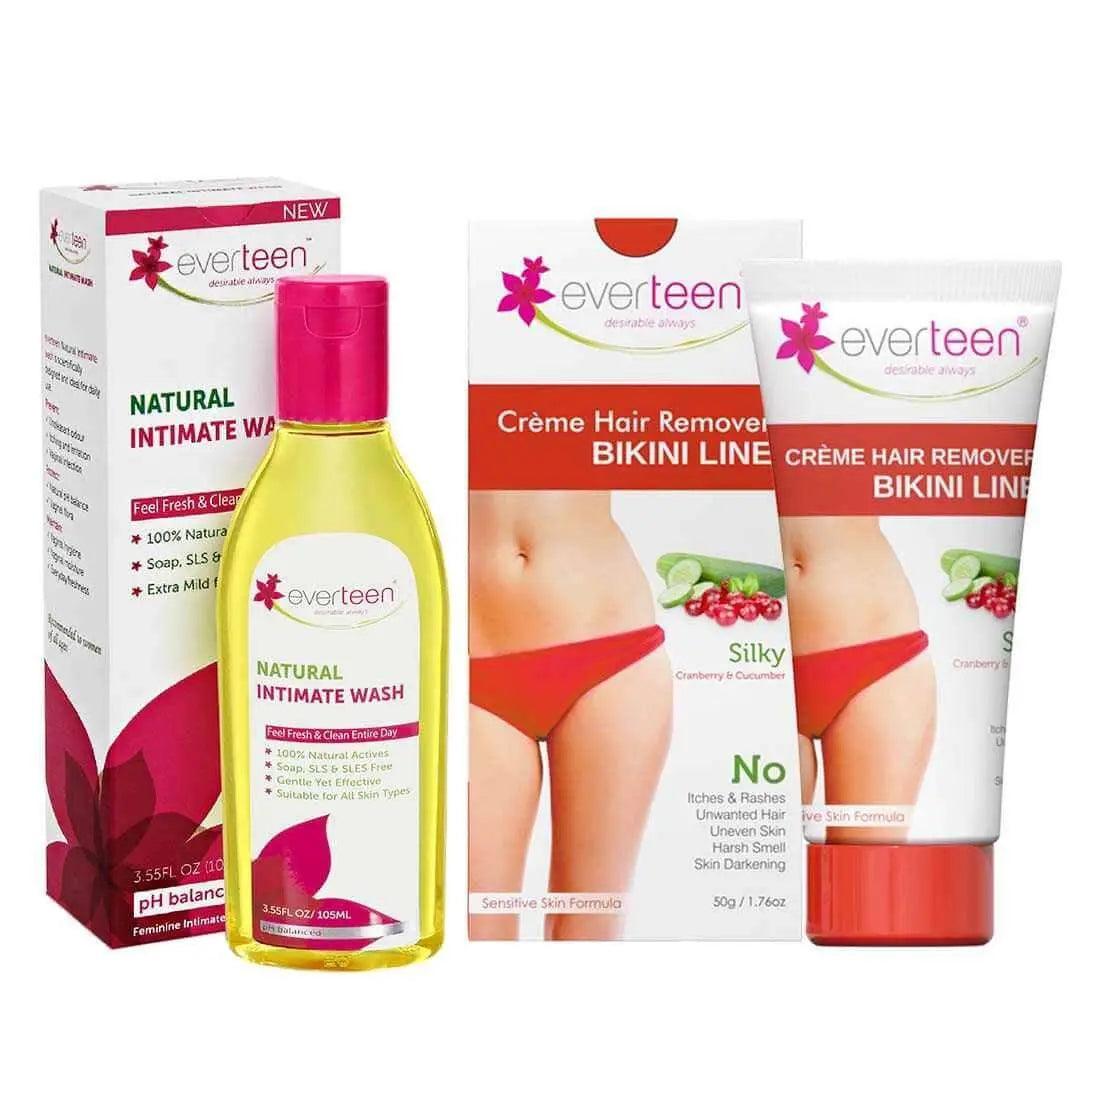 everteen Combo: Bikini Line Hair Removal Creme SILKY and Natural Intimate Wash for Women 9559682302526